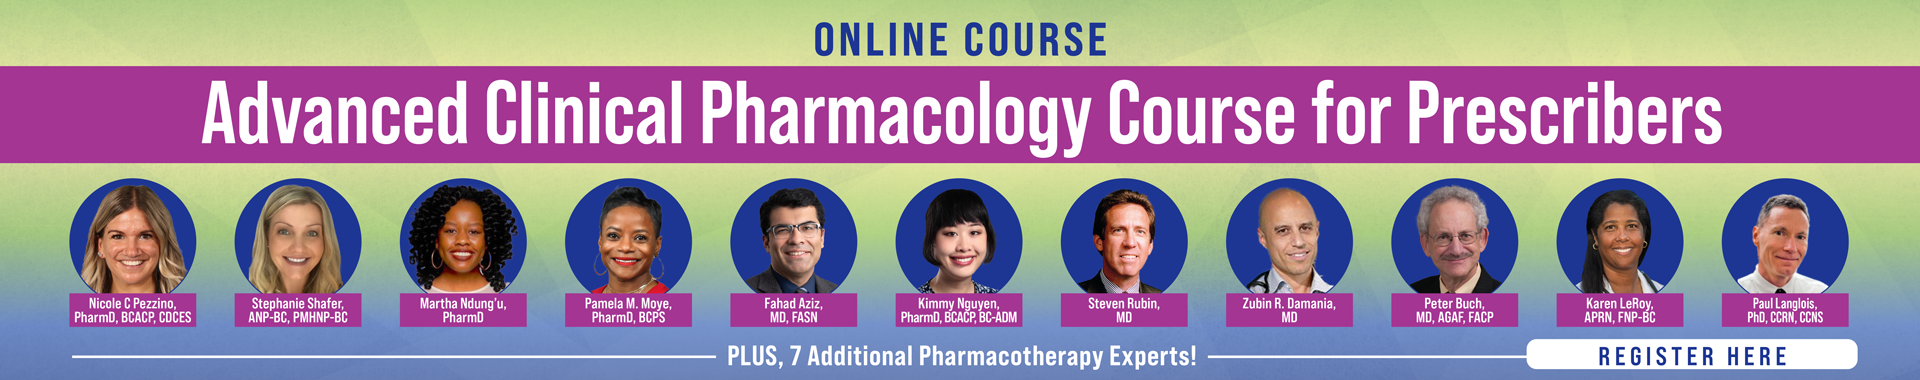 Advanced Clinical Pharmacology Course for Prescribers